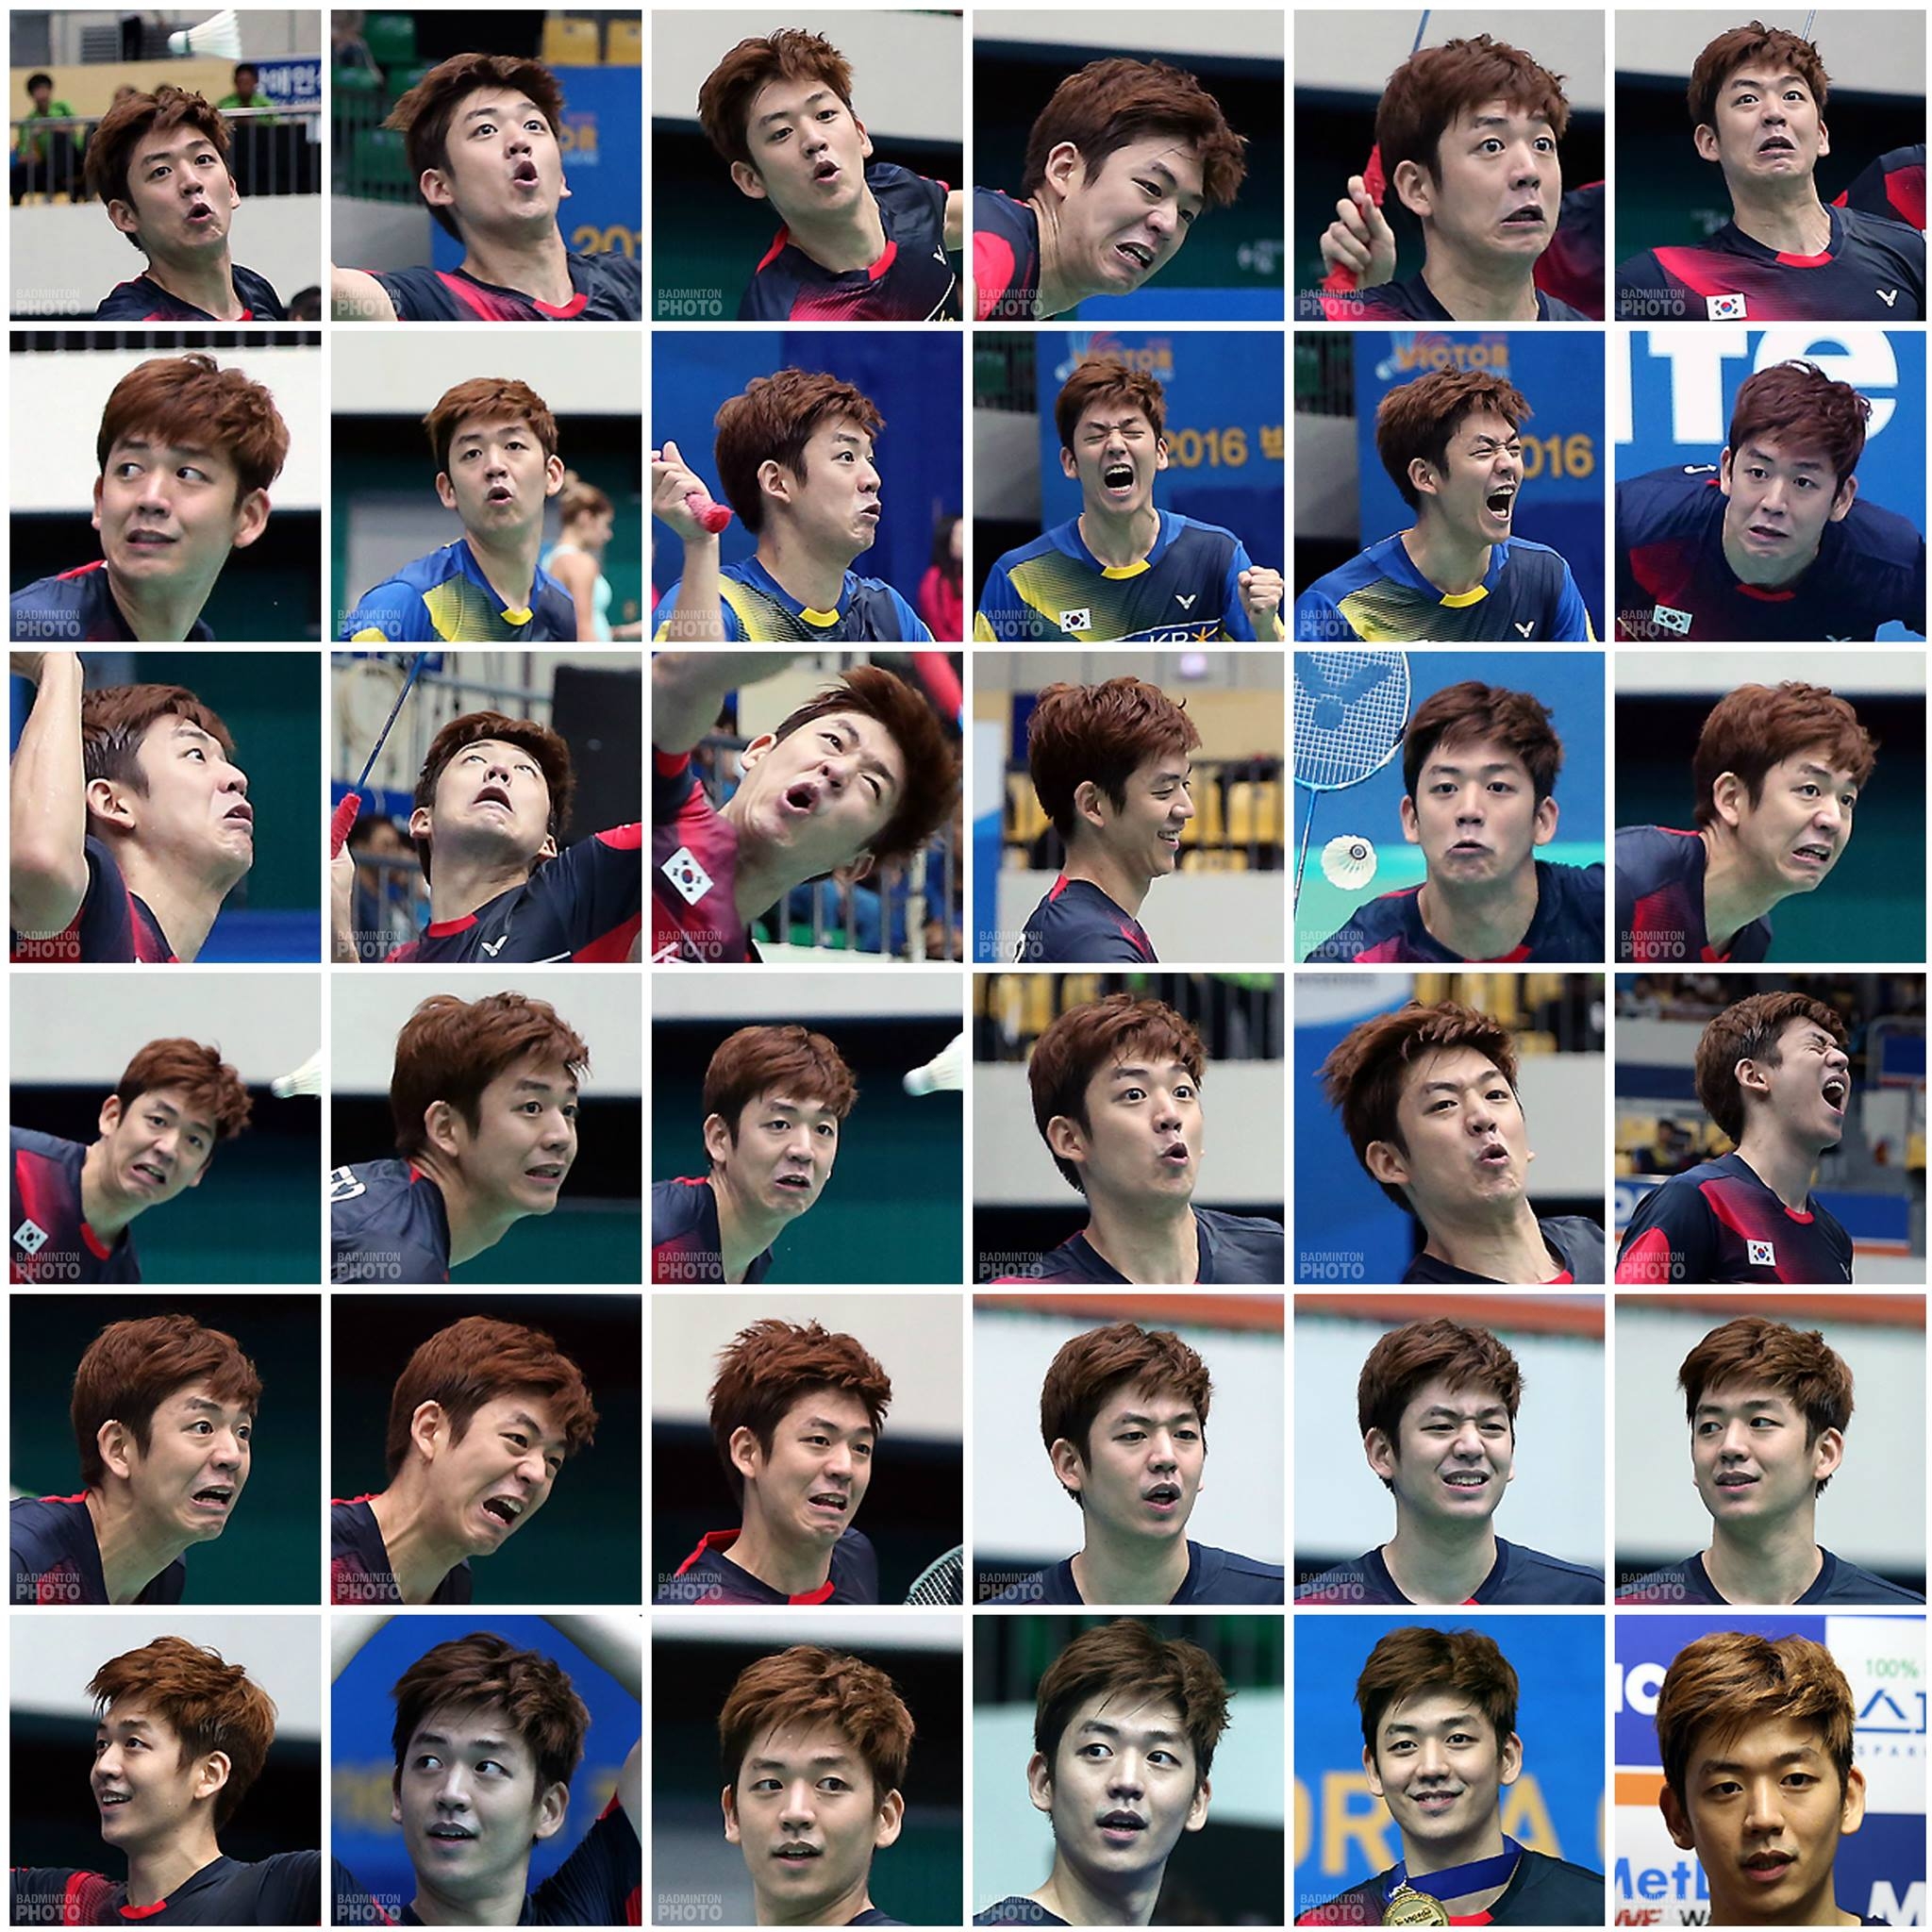 The Many Faces of Lee Yong Dae